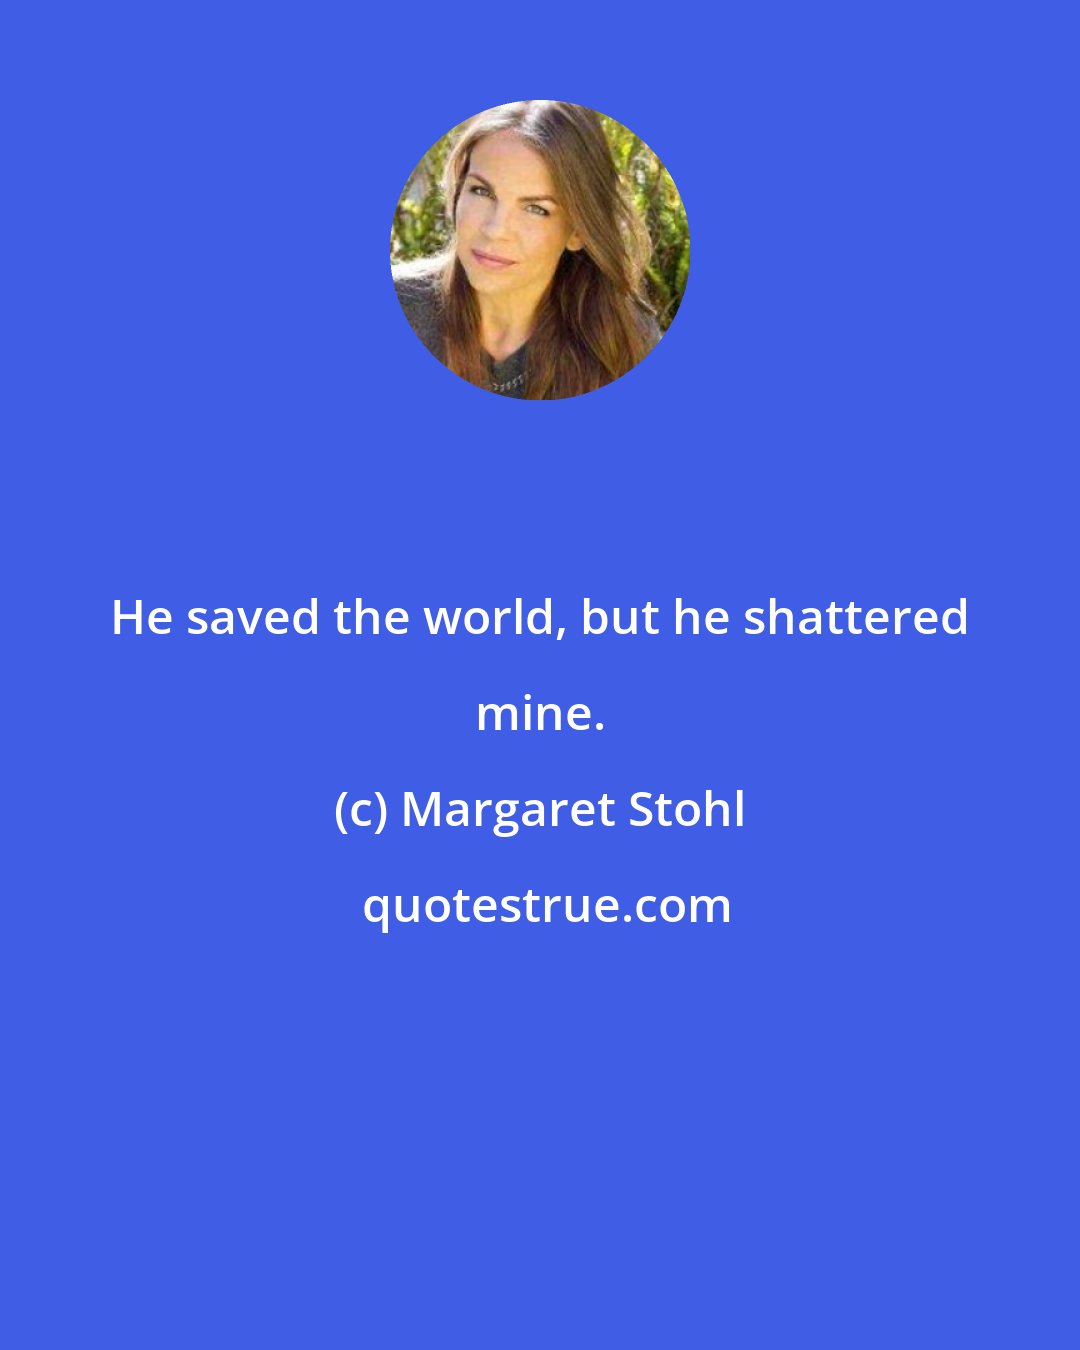 Margaret Stohl: He saved the world, but he shattered mine.